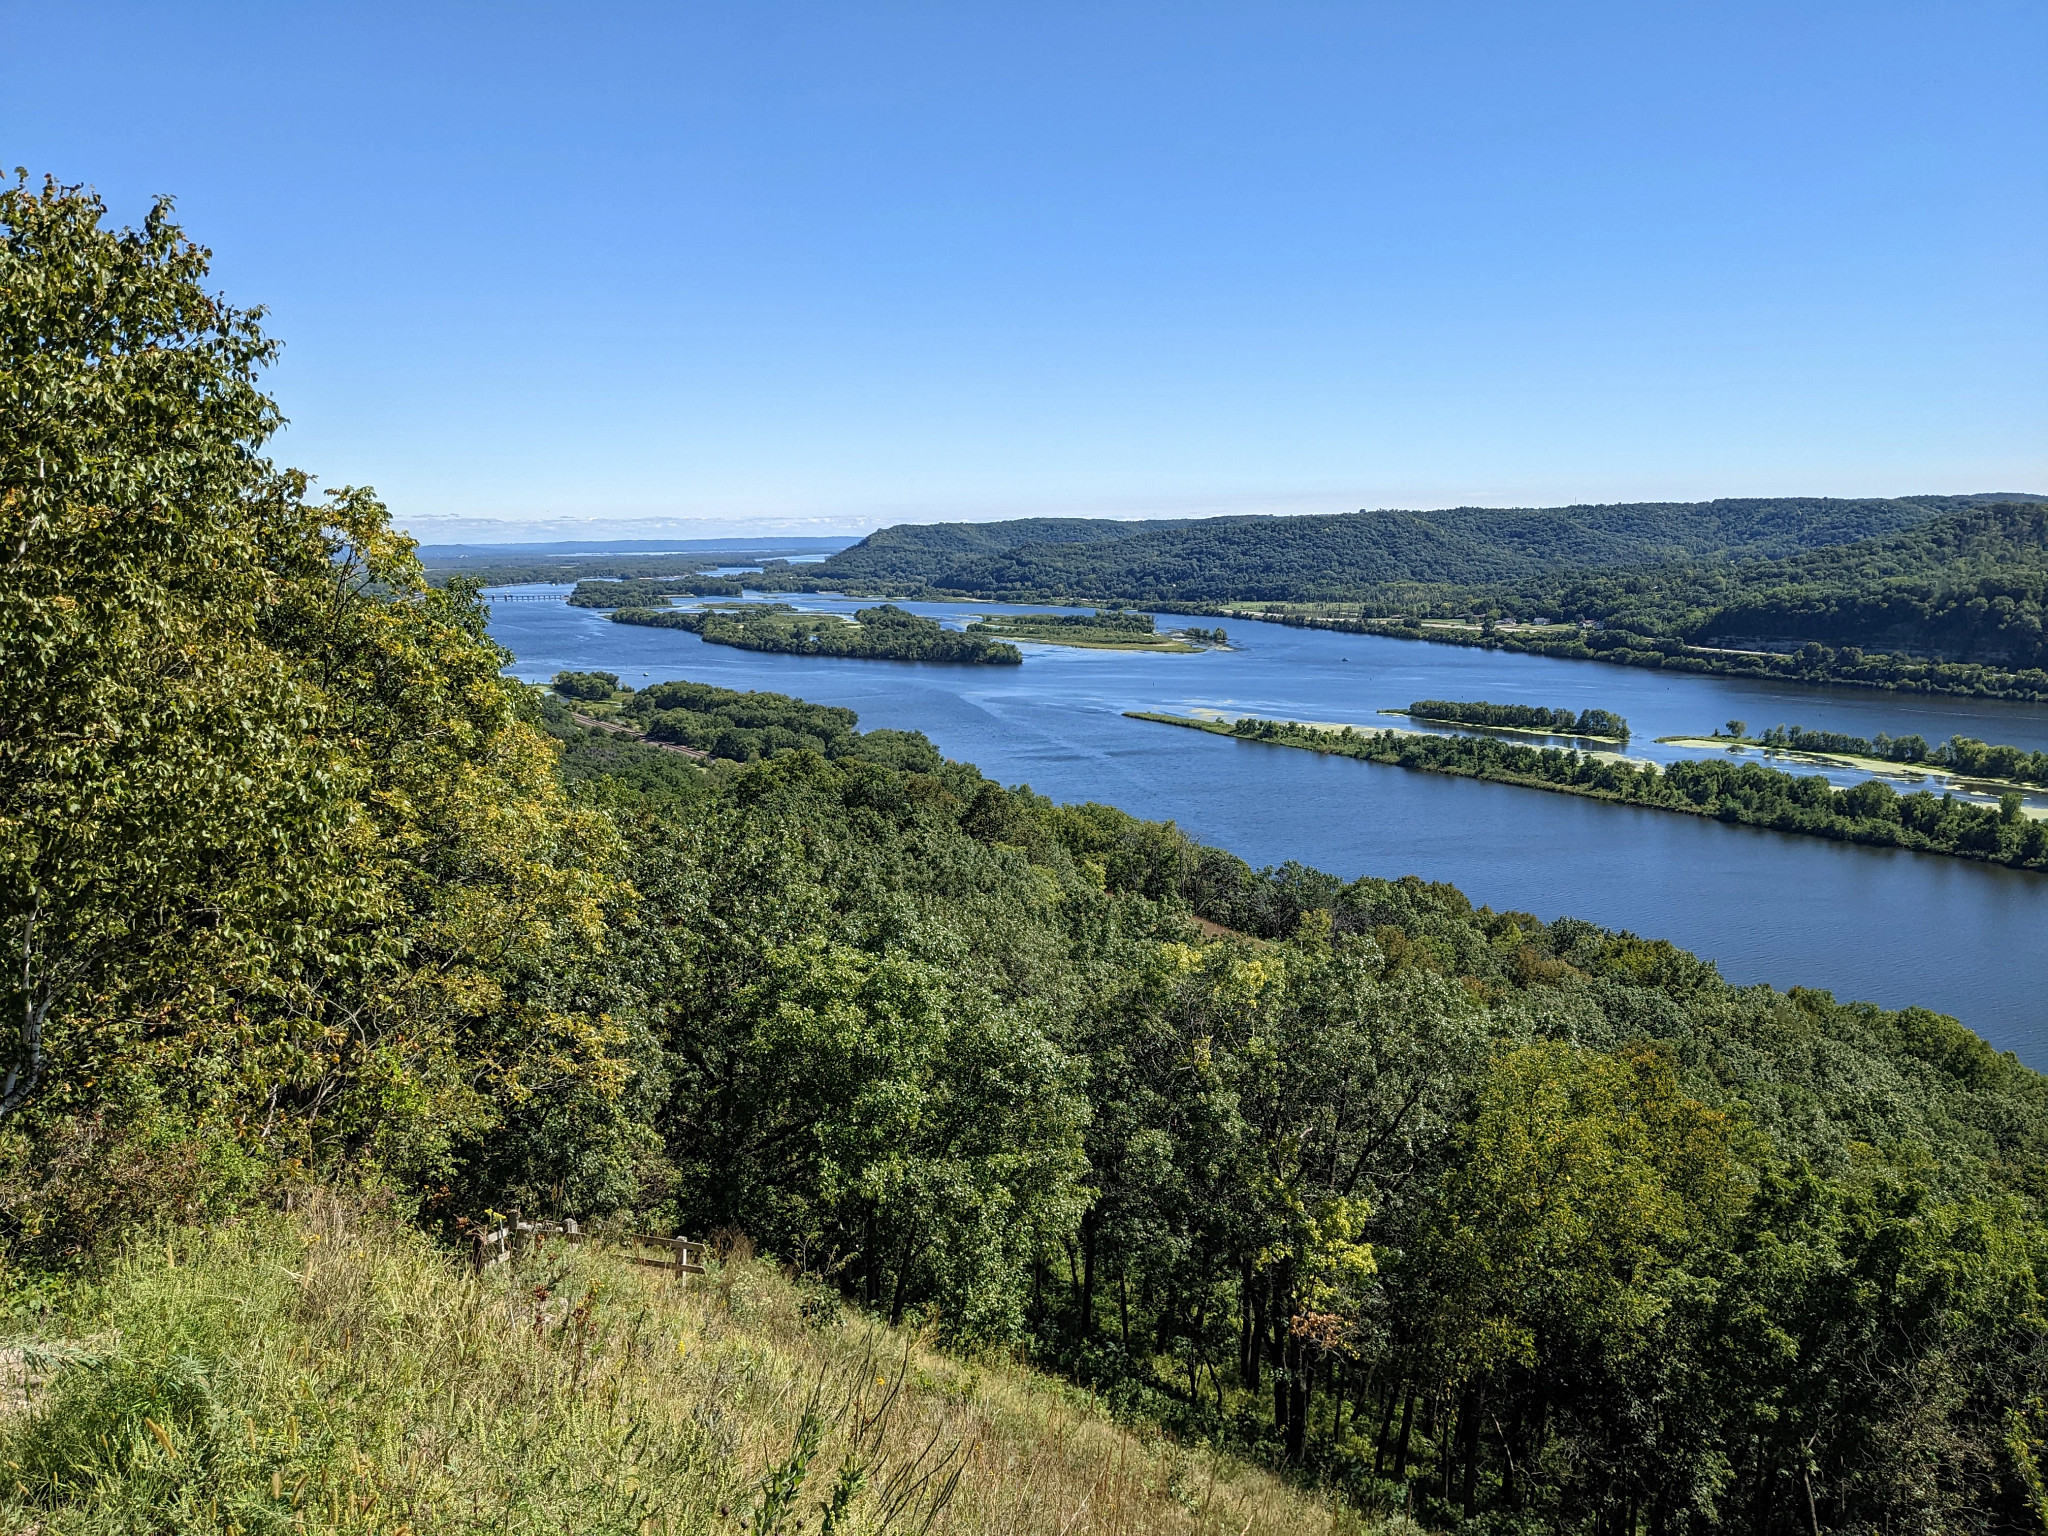 View of the Mississippi River and bluffs from Perrot State Park